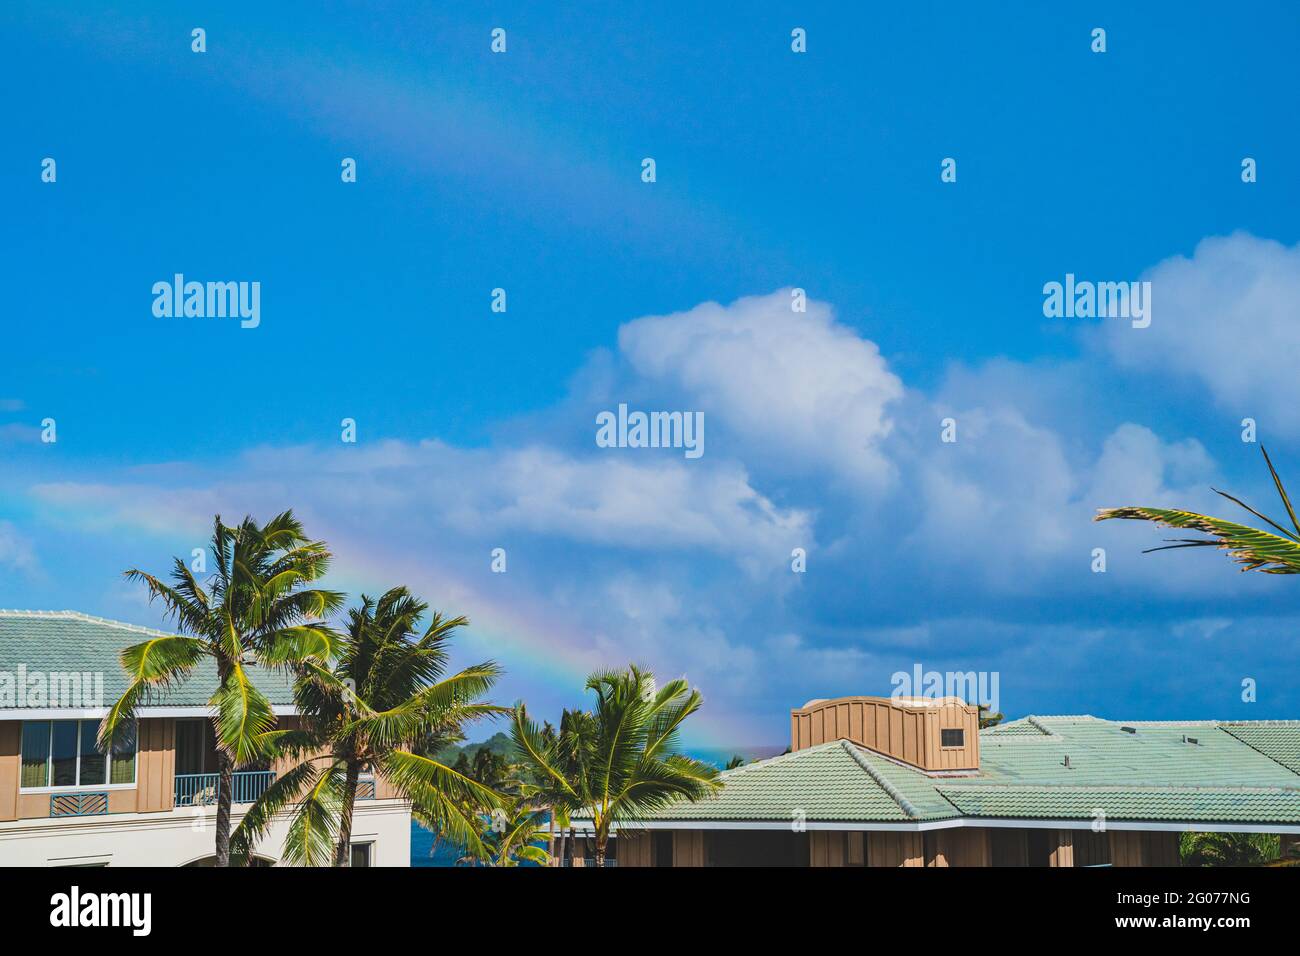 Double rainbow in blue sky above palm trees and rooftops in tropical paradise Stock Photo